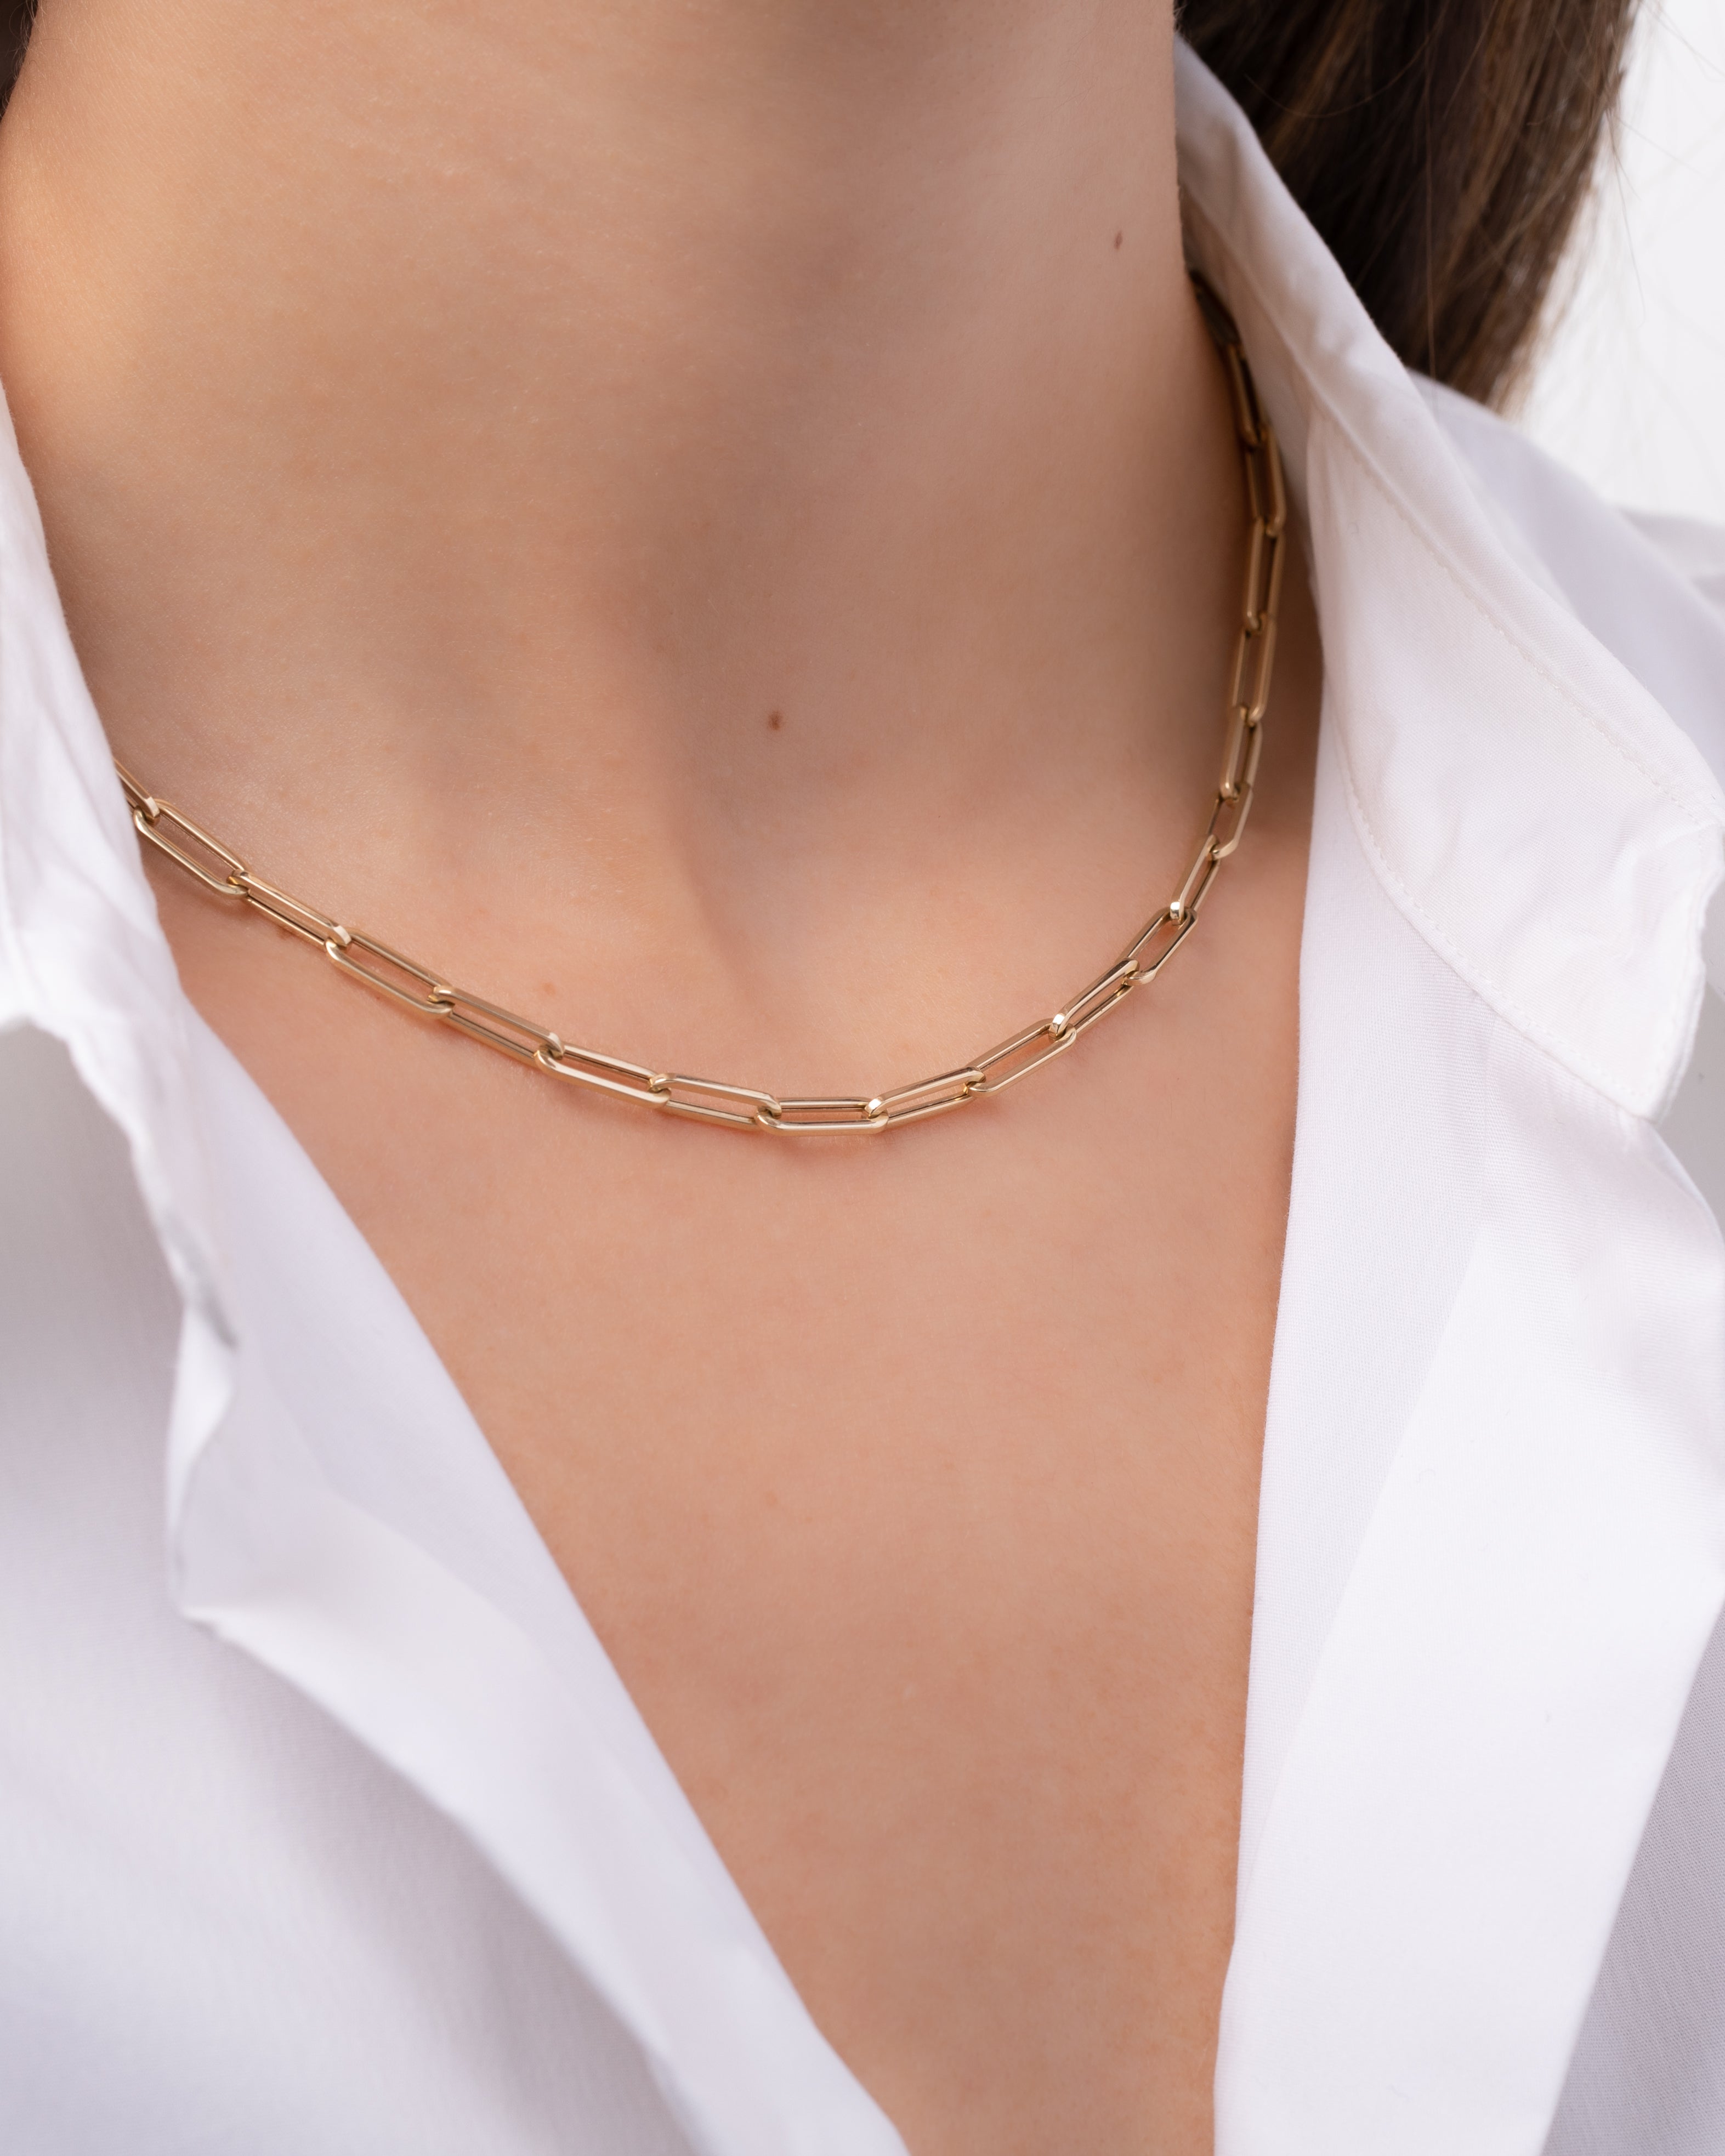 Zoë Chicco 14K Gold Large Mantra Adjustable Paperclip Chain Lariat Necklace 14K Yellow Gold / The Best Thing to Hold Onto in Life Is Each Other / Star